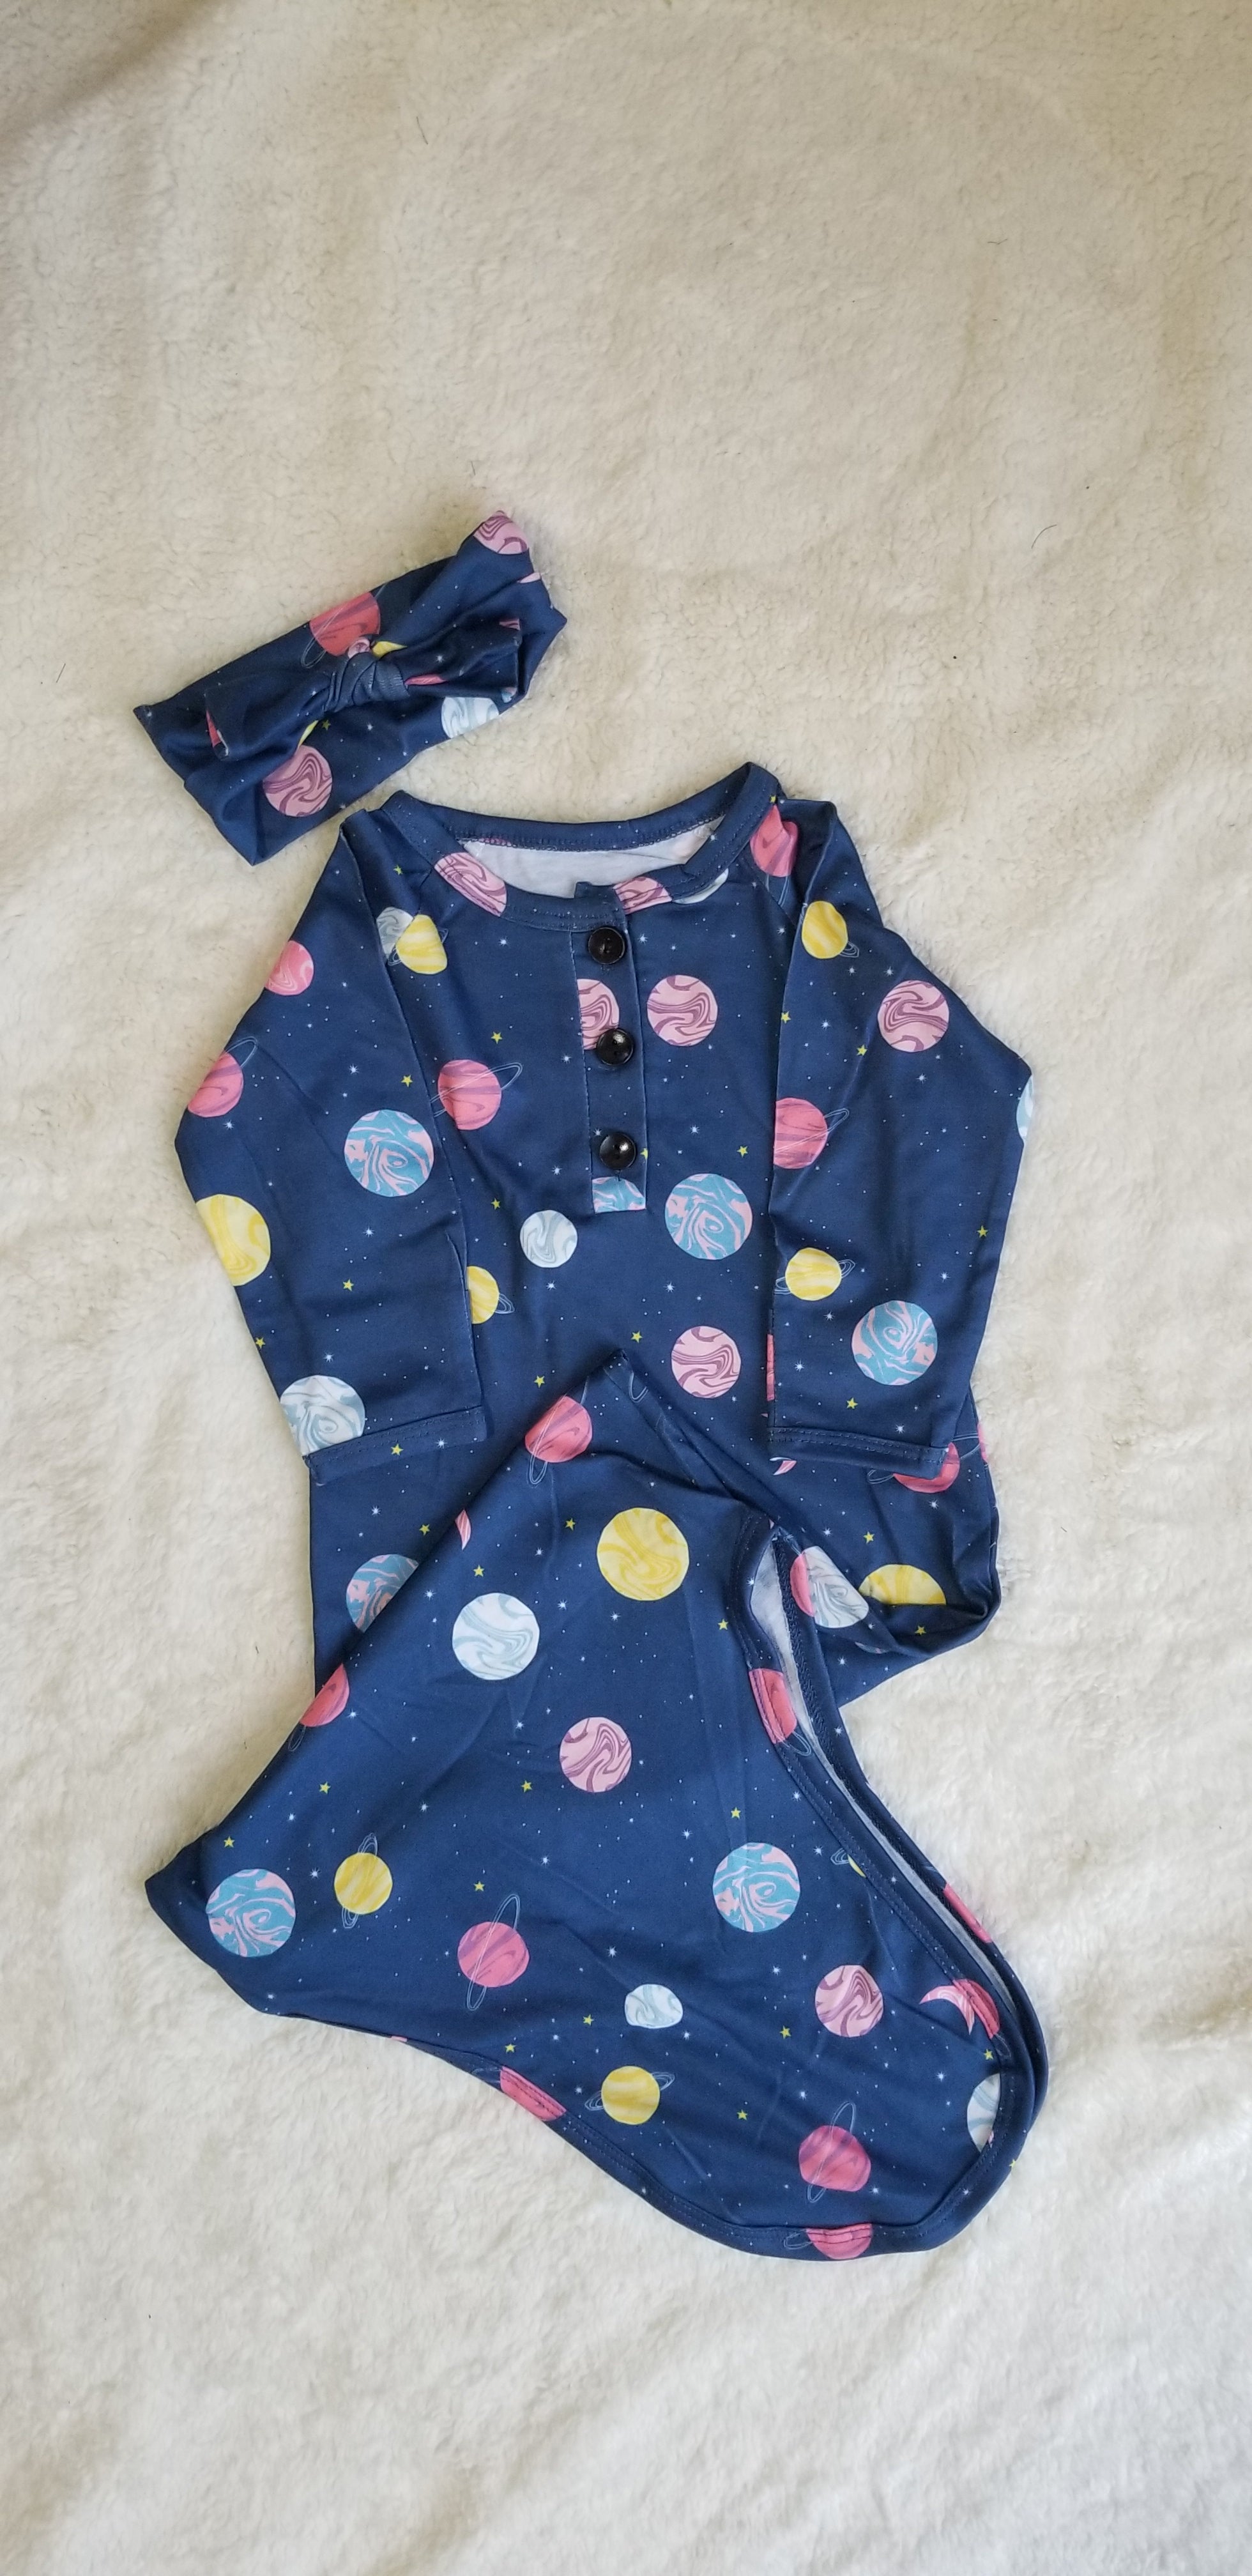 "This Lovely Planet" Unisex Baby Knotted Gown, Babies First Outfit